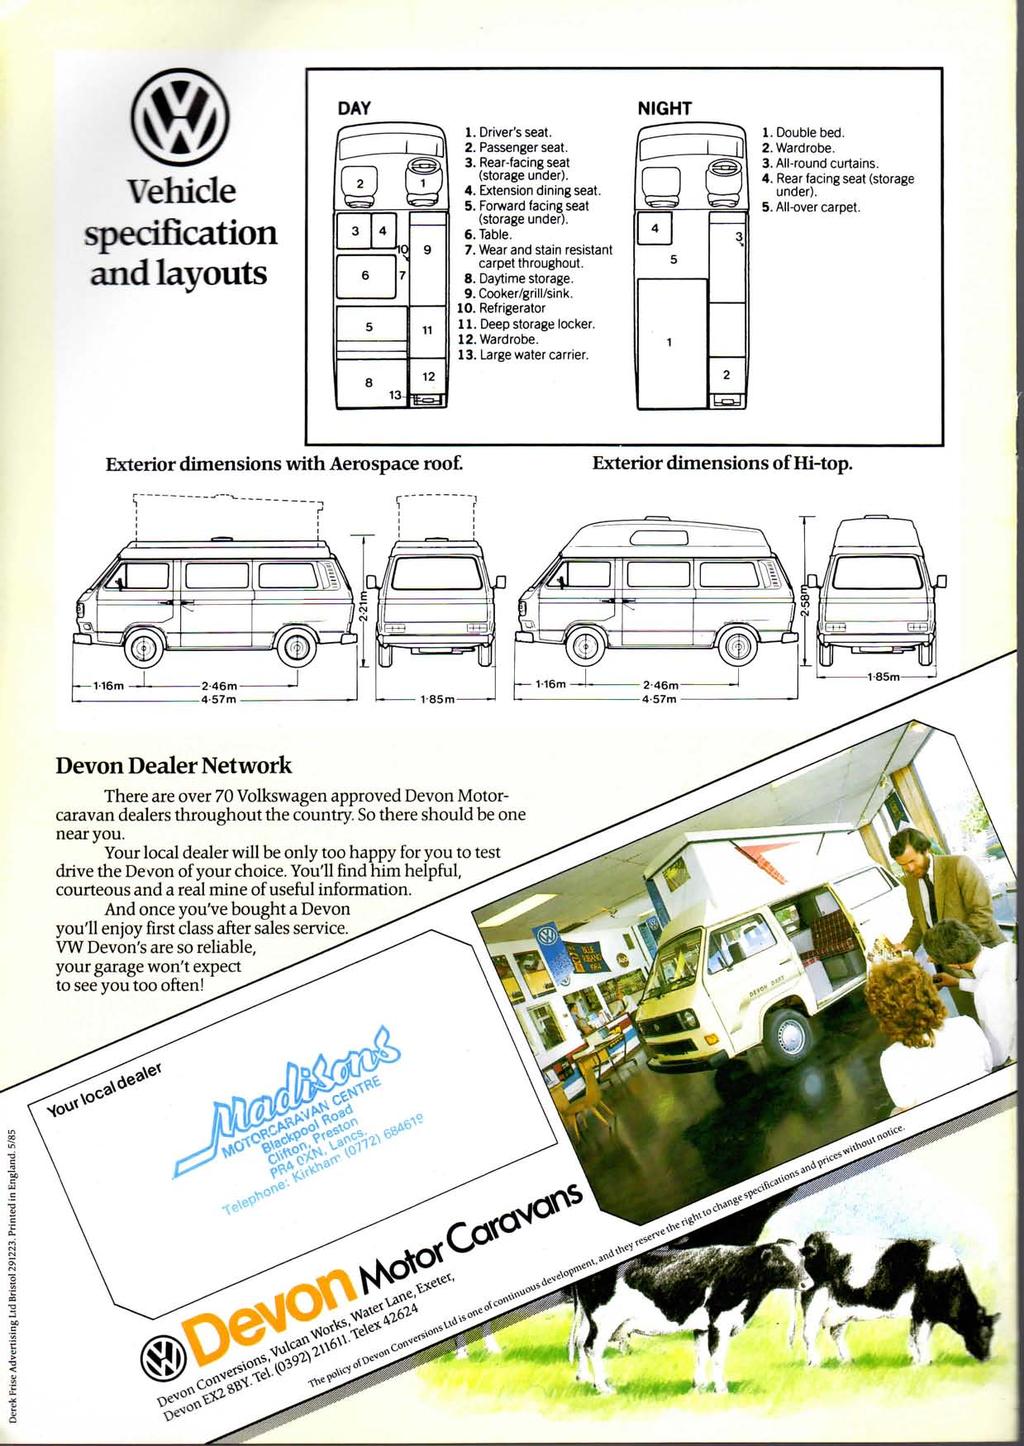 Vehicle specification and layouts DAY 3 4 -TO 9 1. Driver's seat. 2. Passenger seat. 3. Rear-facing seat (storage under). 4. Extension dining seat. 5. Forward facing seat (storage under). 6. Table. 7.